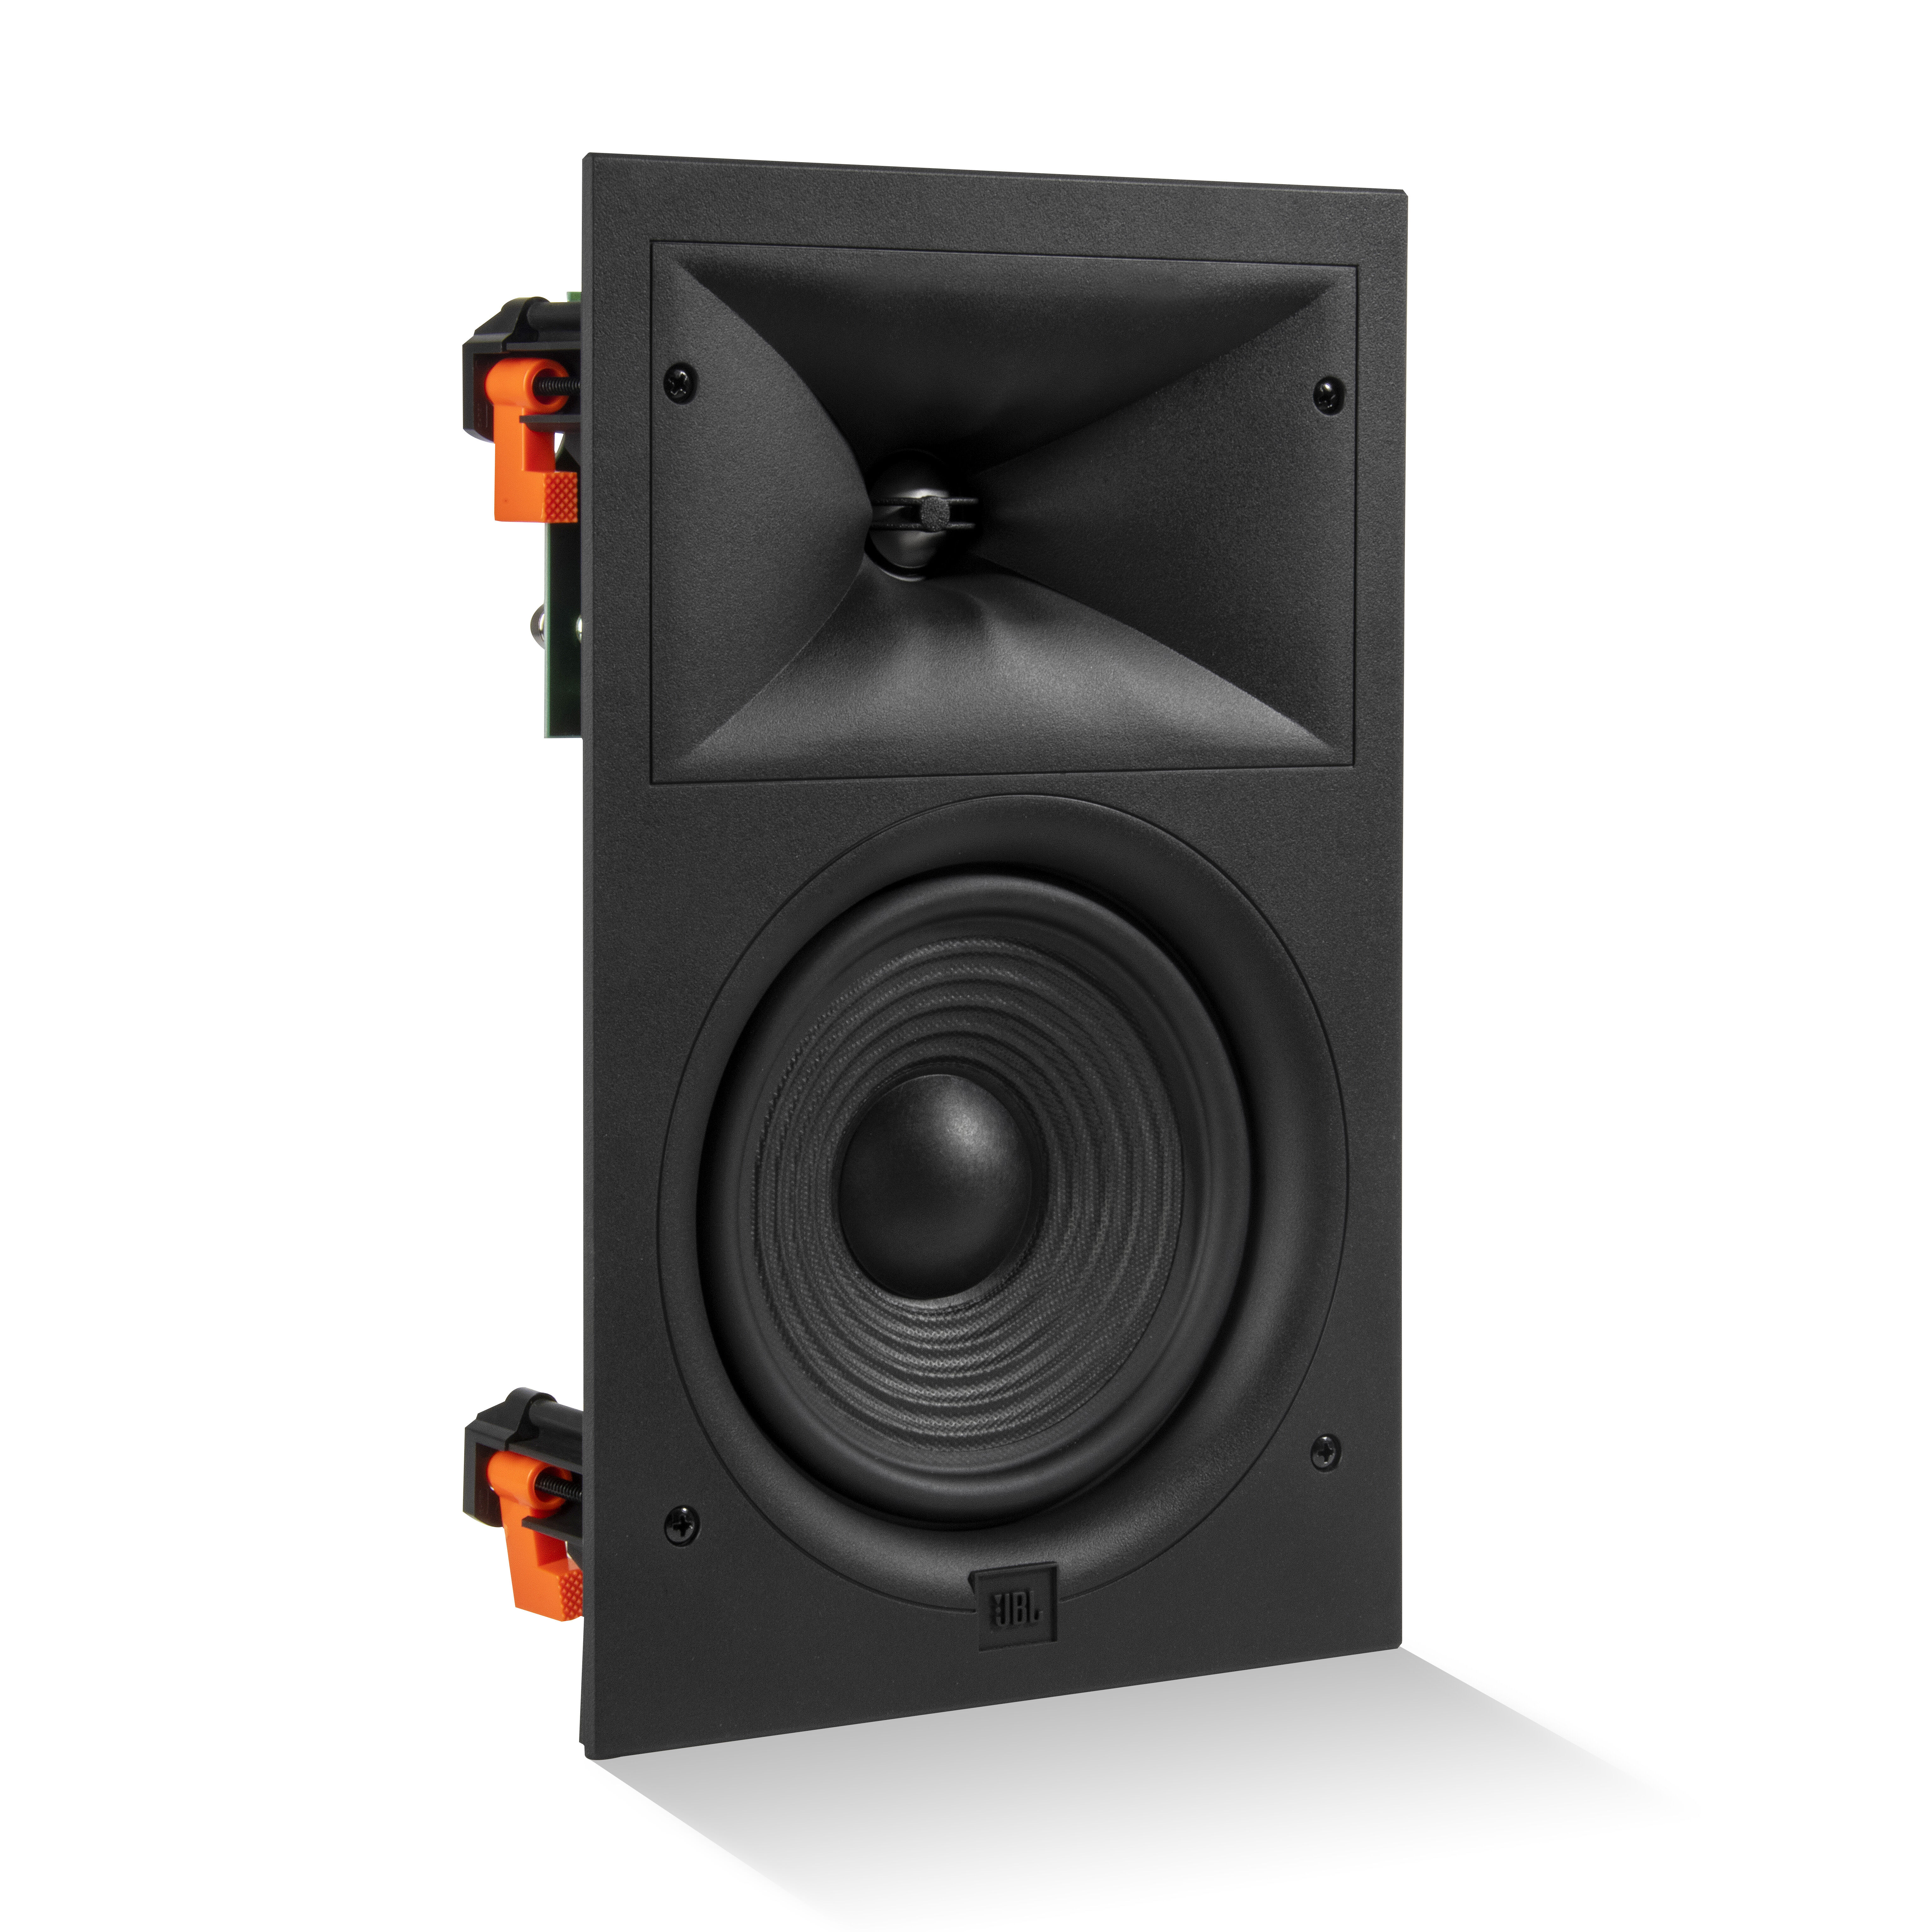 Luxury Audio Introduces JBL Stage Architectural Series Loudspeakers With Visually Discreet, High-Performance Sound